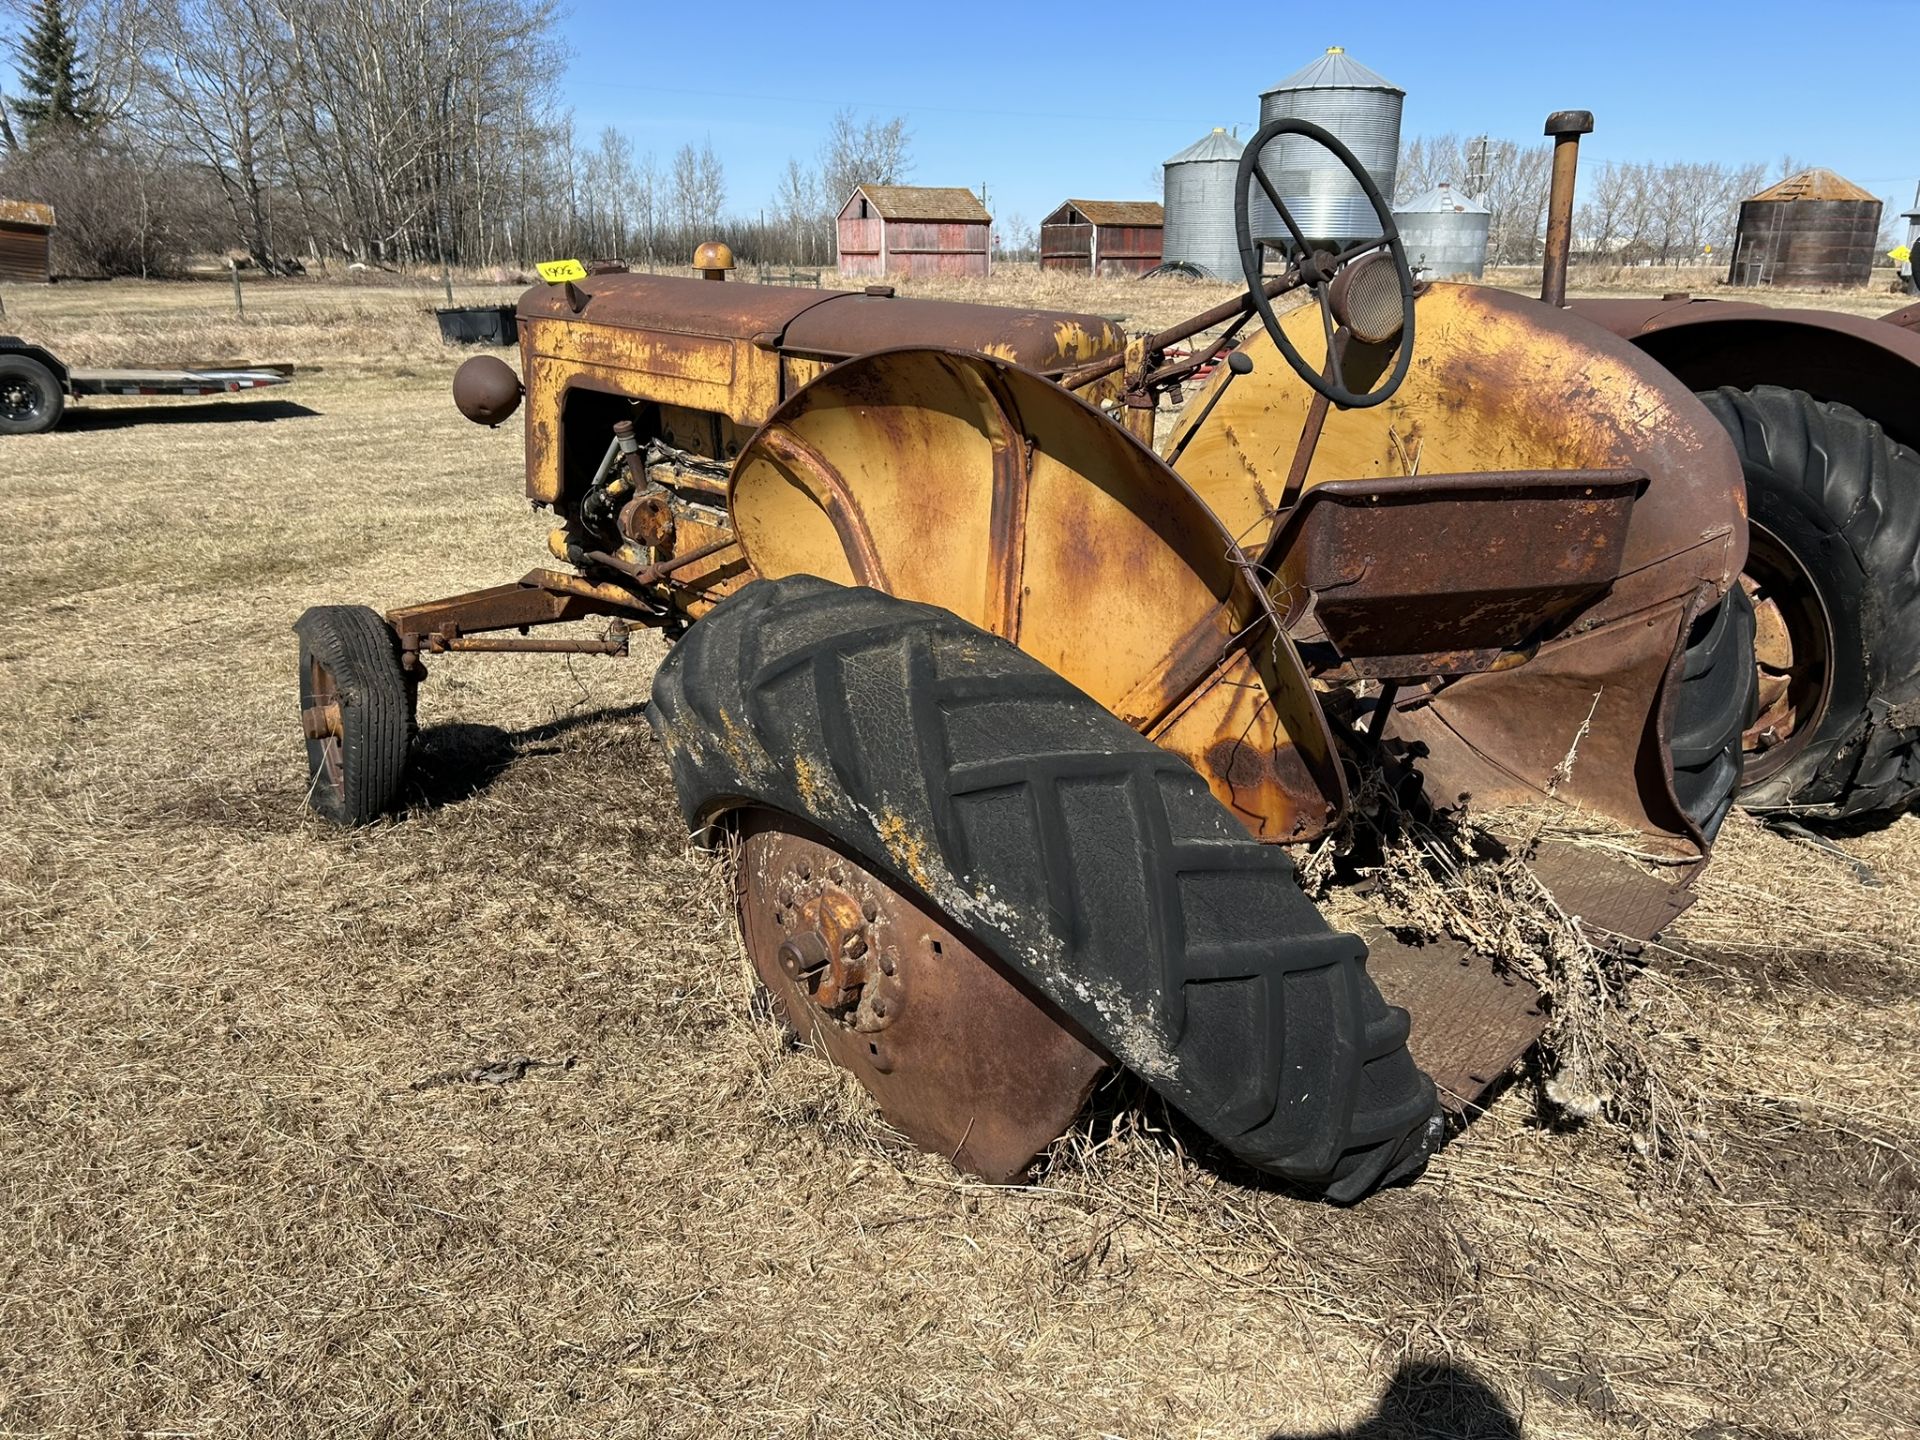 **OFFSITE** 1944 MINNEAPOLIS MOLINE MOD. 7AE TRACTOR S/N 0094900101 - LOCATED 40515 RANGE ROAD - Image 4 of 5